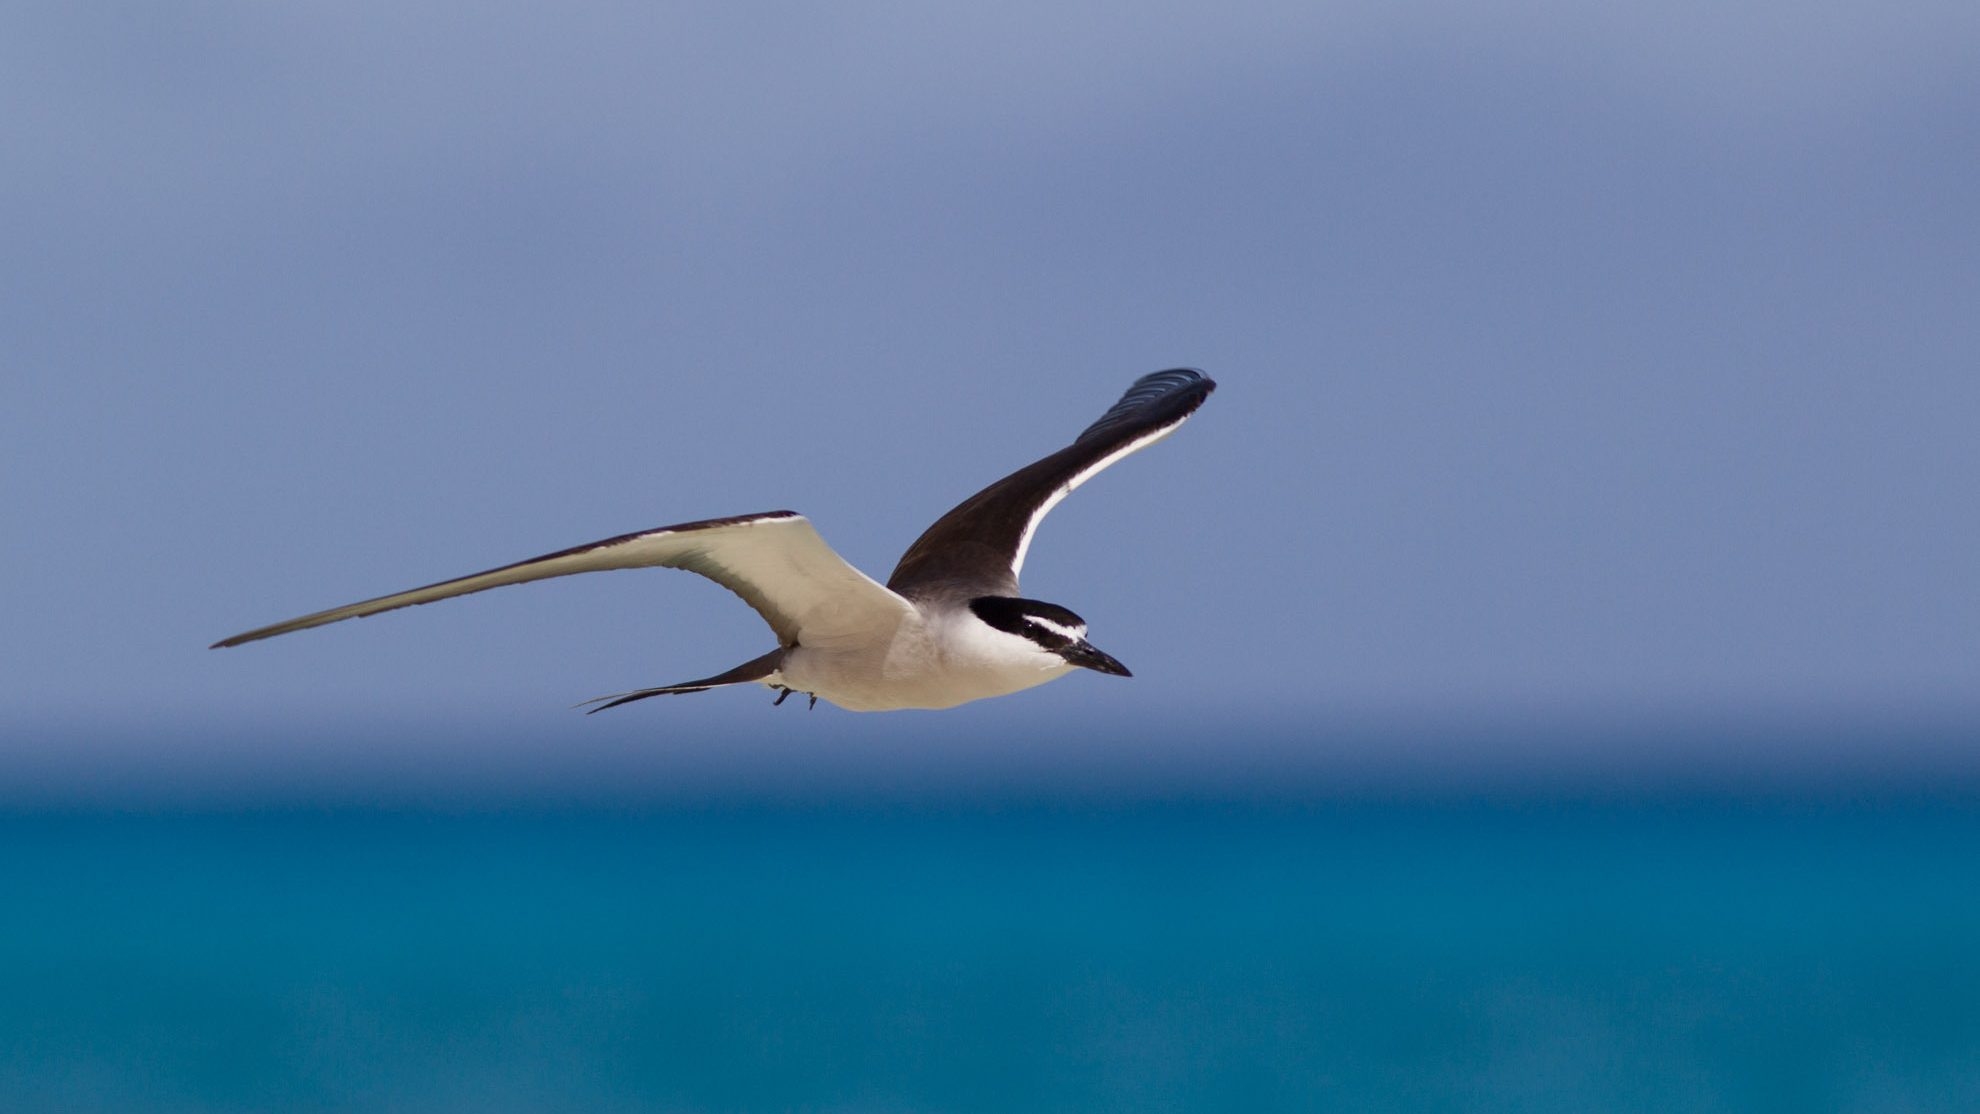 tern flying above the ocean with white notch above eyes